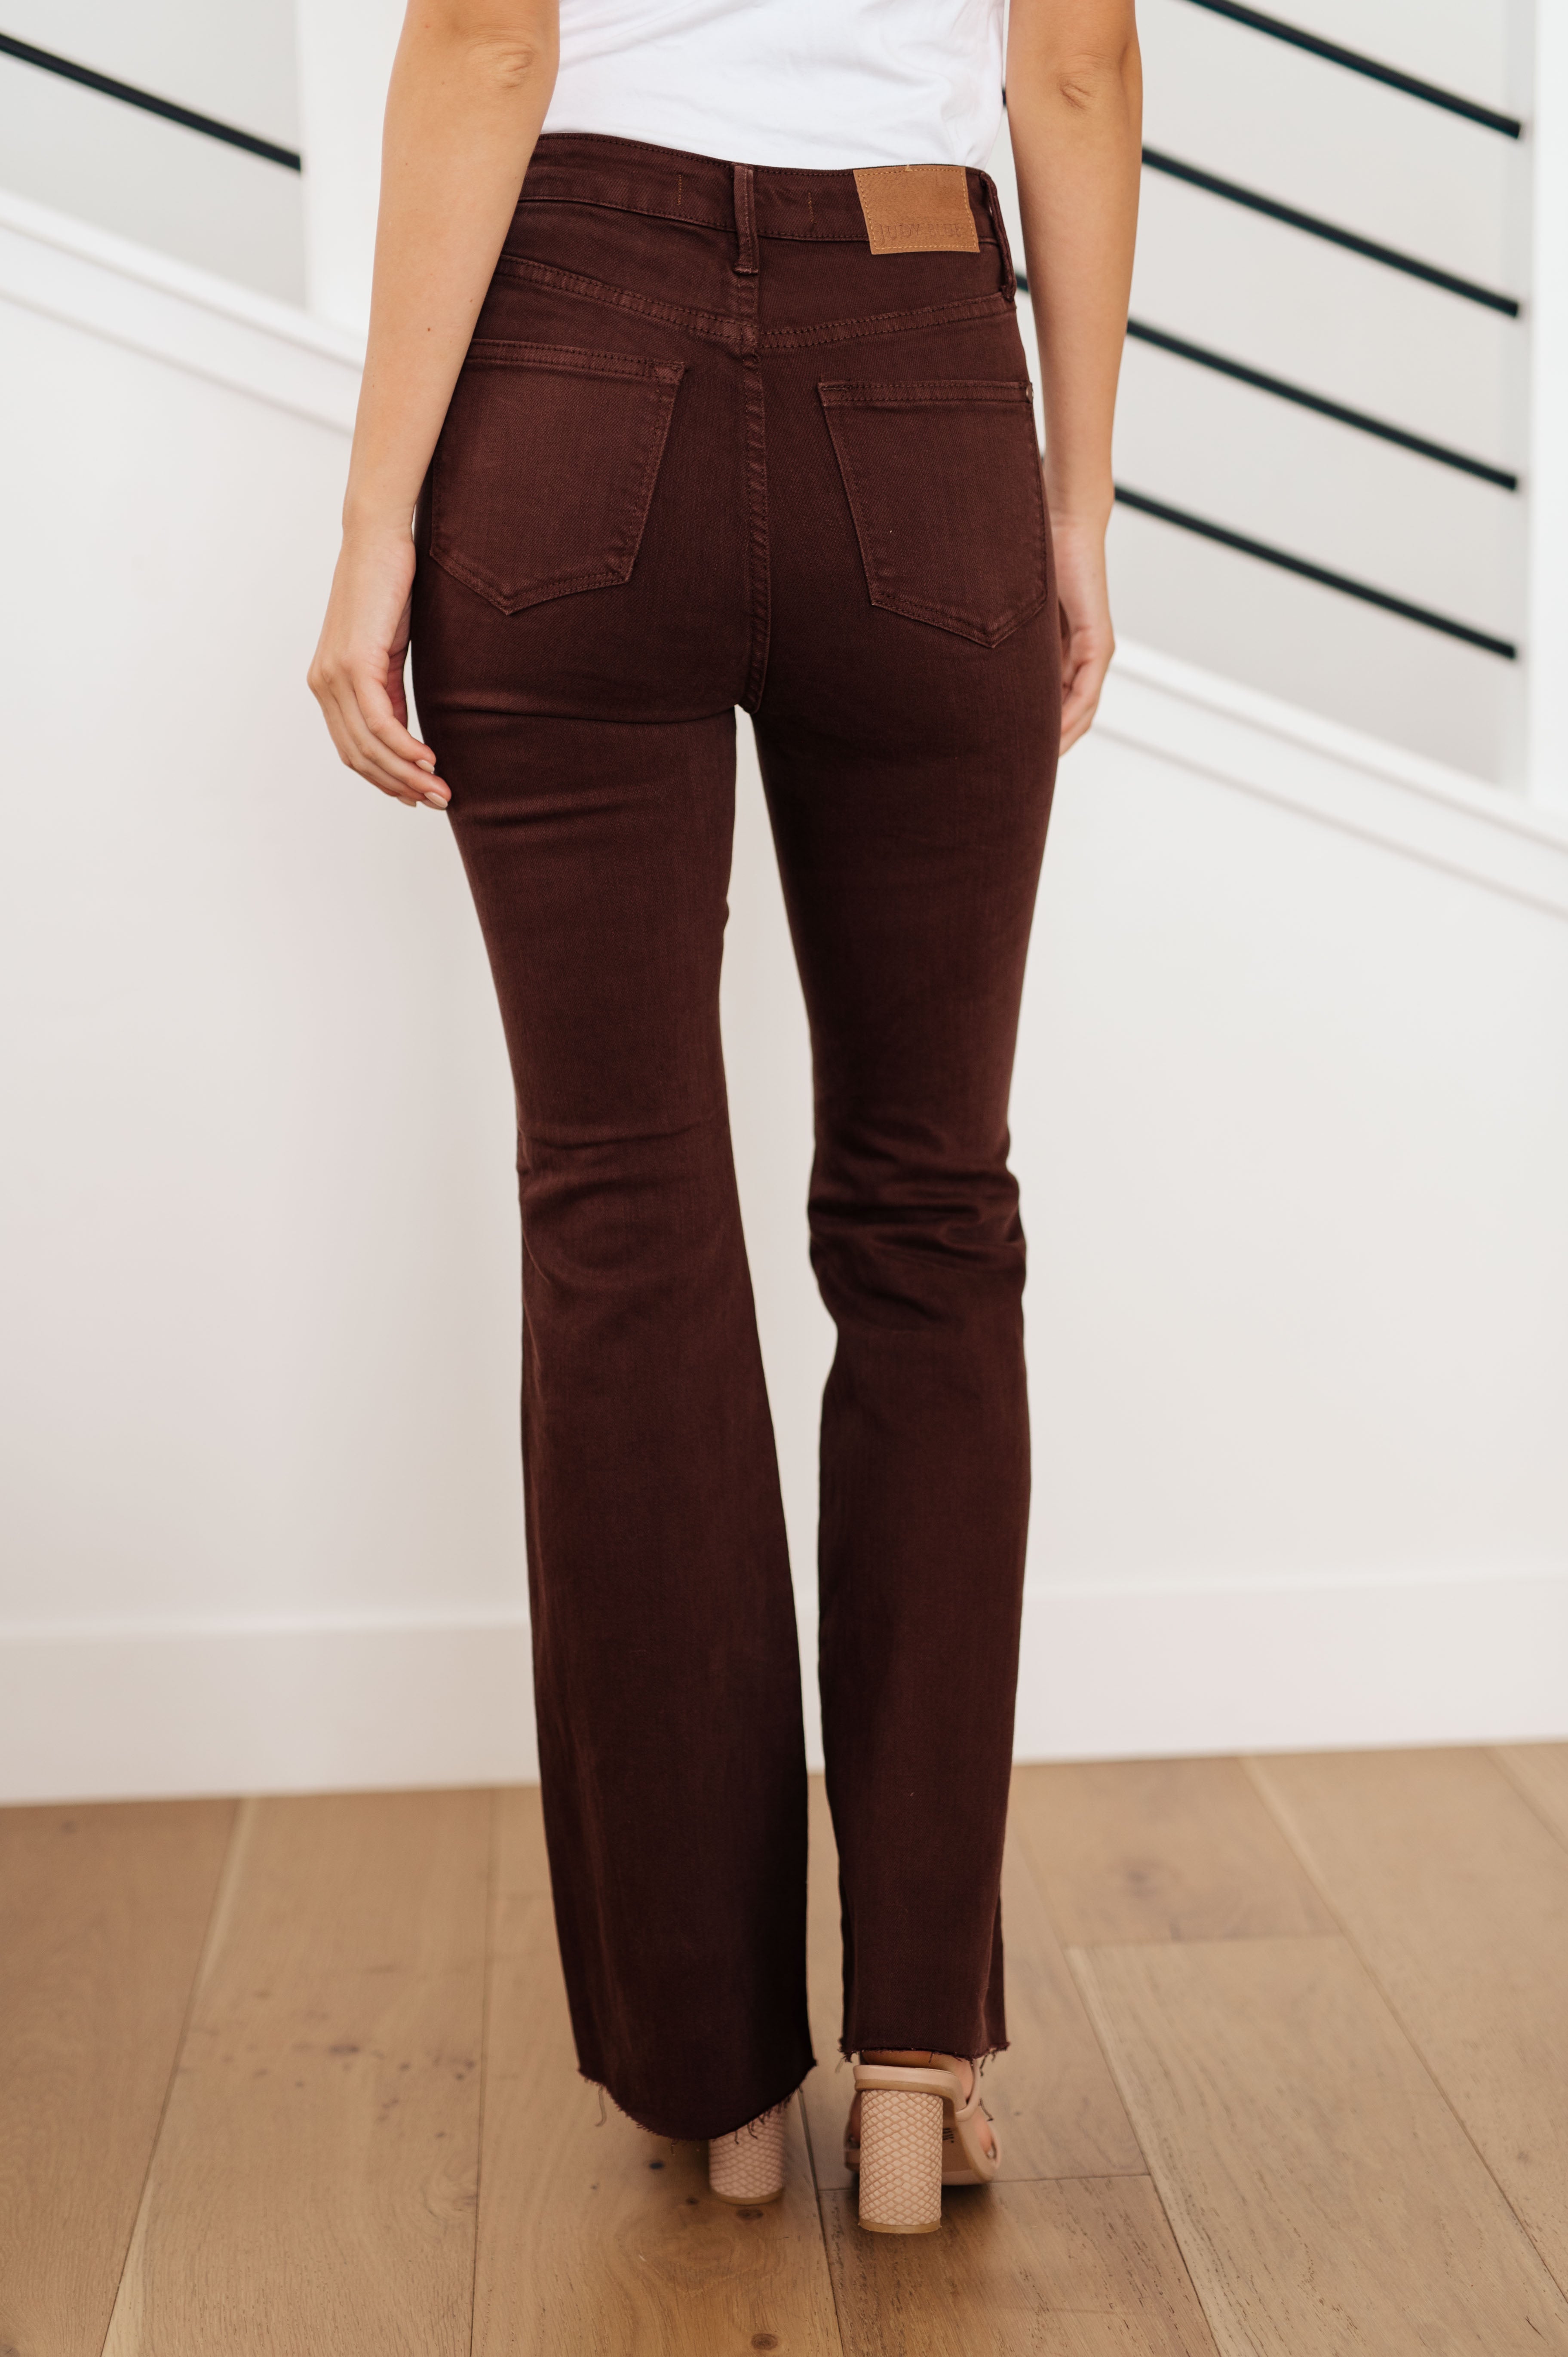 Judy Blue Sienna High Rise Tummy Control Top Flare Jeans in Espresso Ave Shops 10-17-23